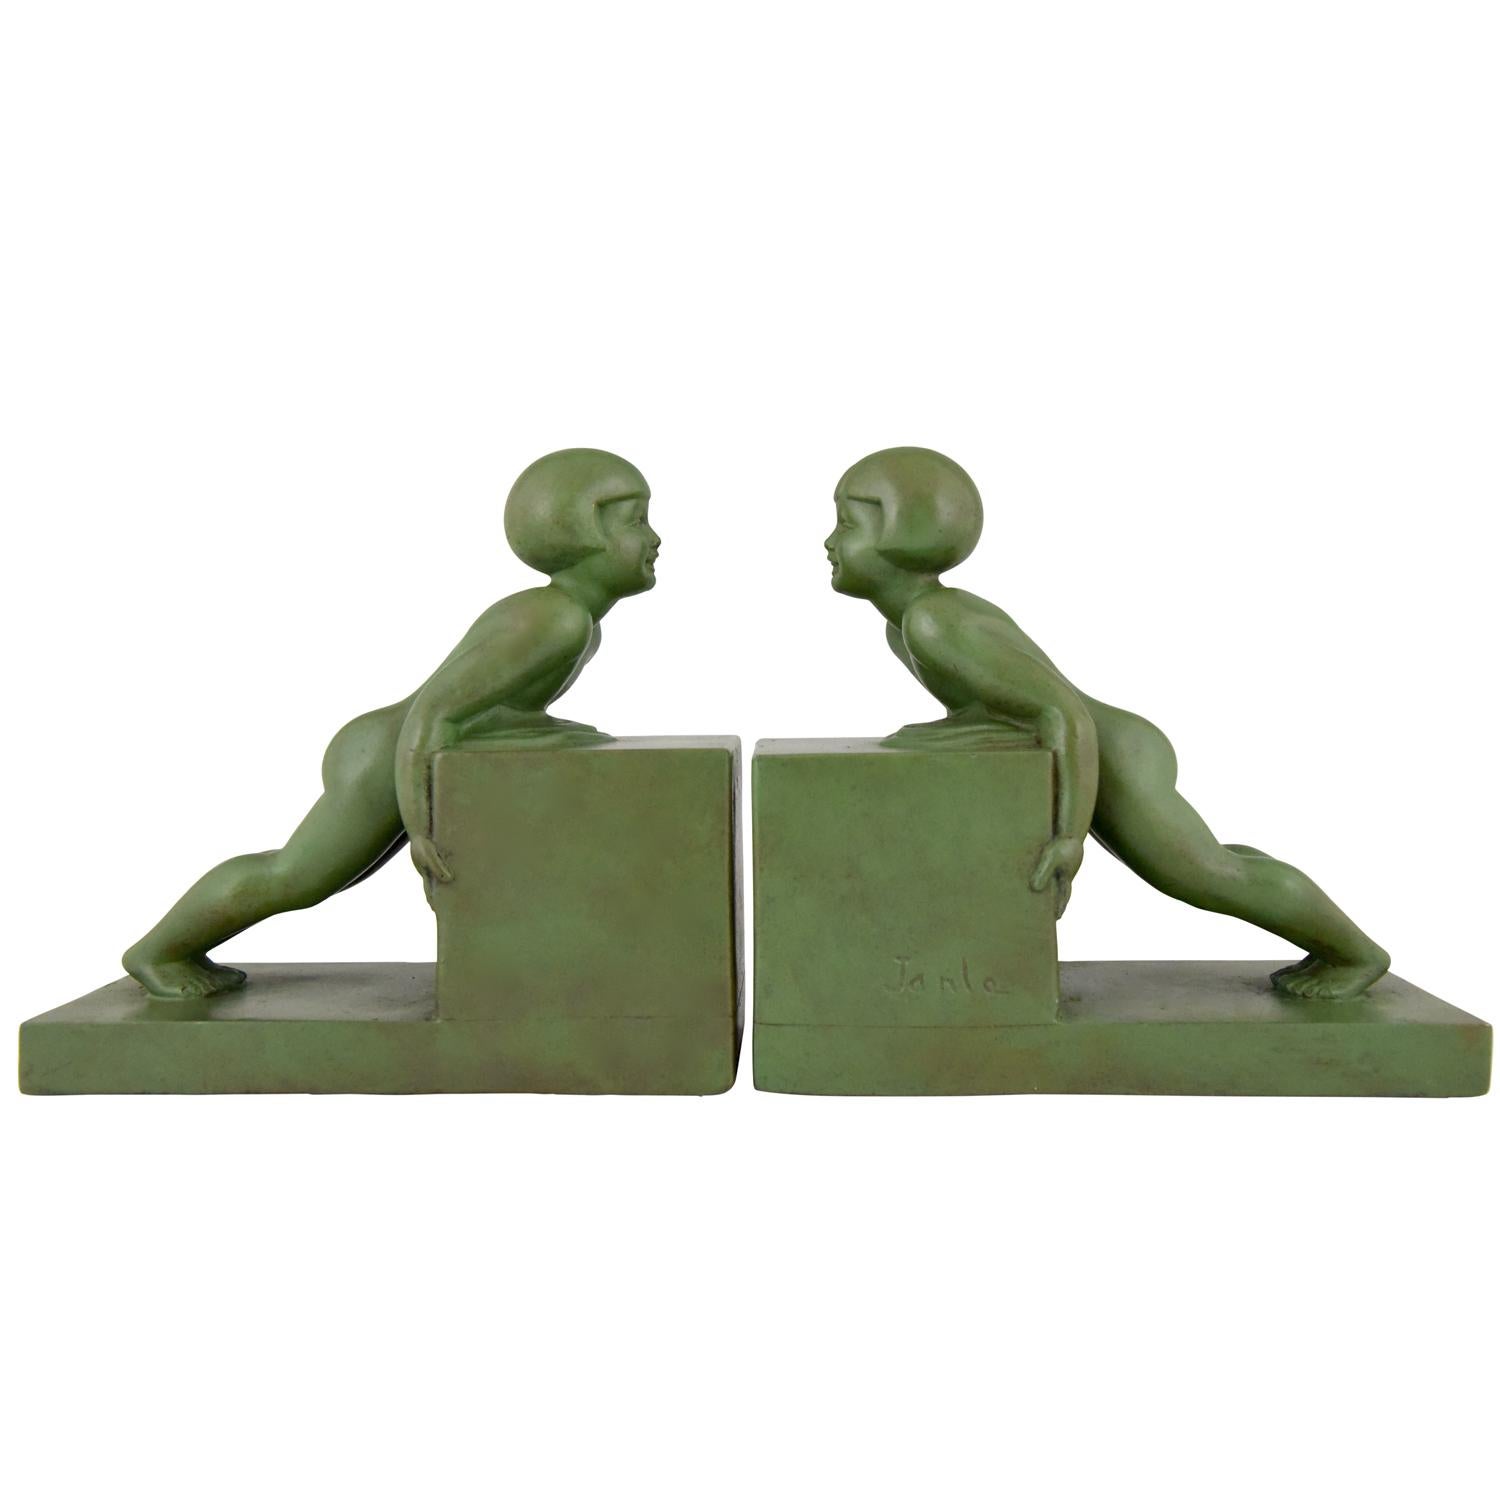 Art Deco Bookends with Children Signed Janle, France, 1930